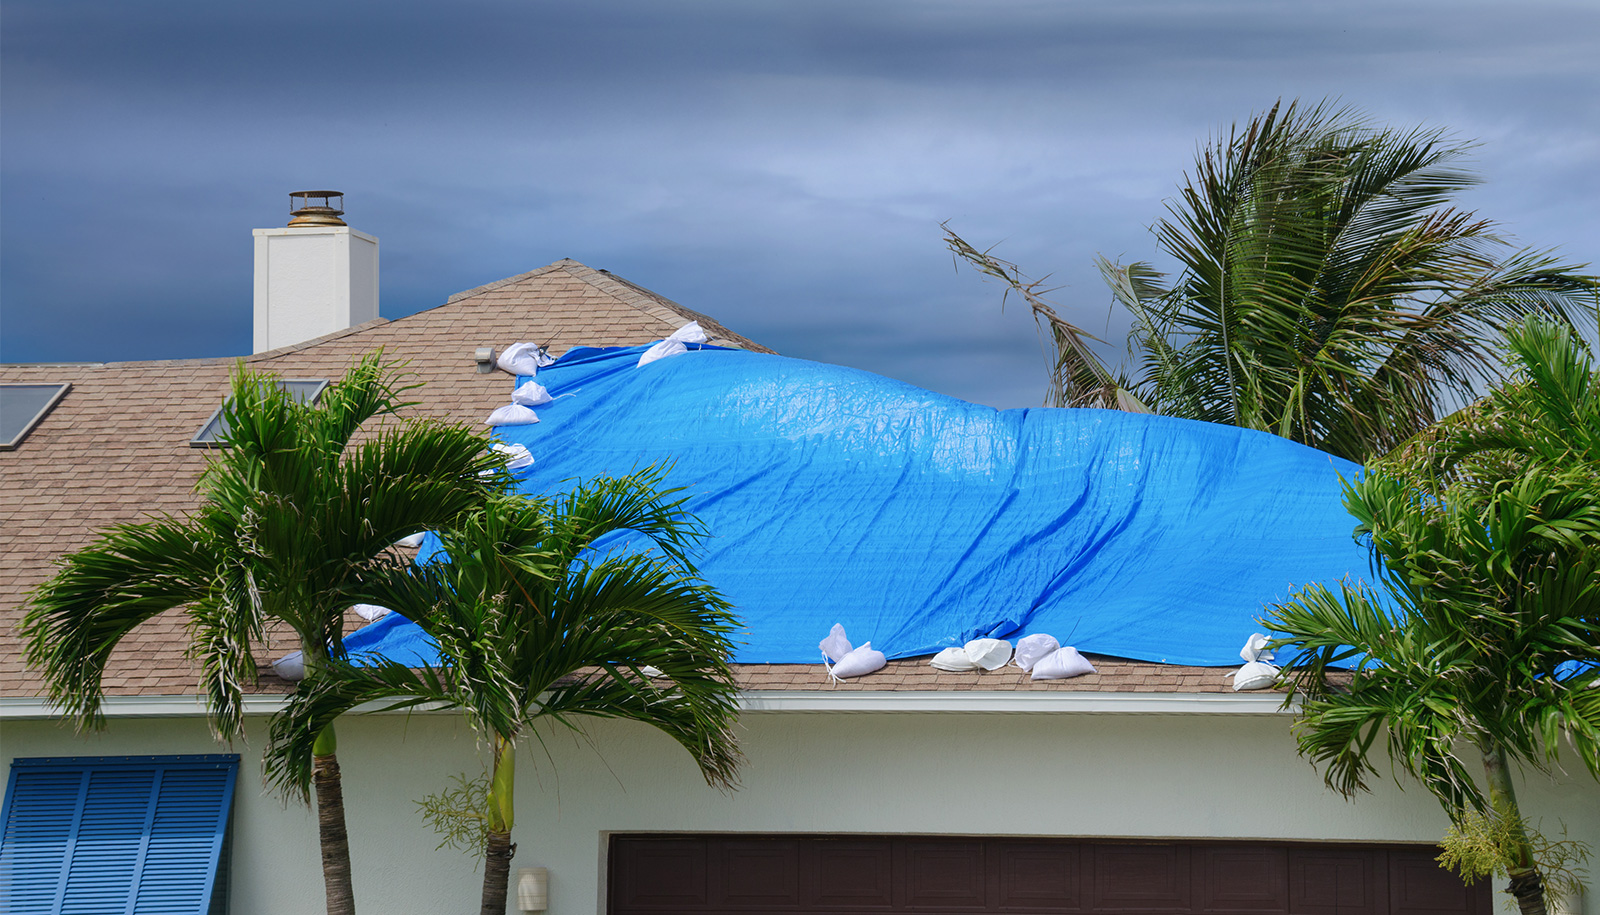 Does homeowners insurance cover hurricane damage